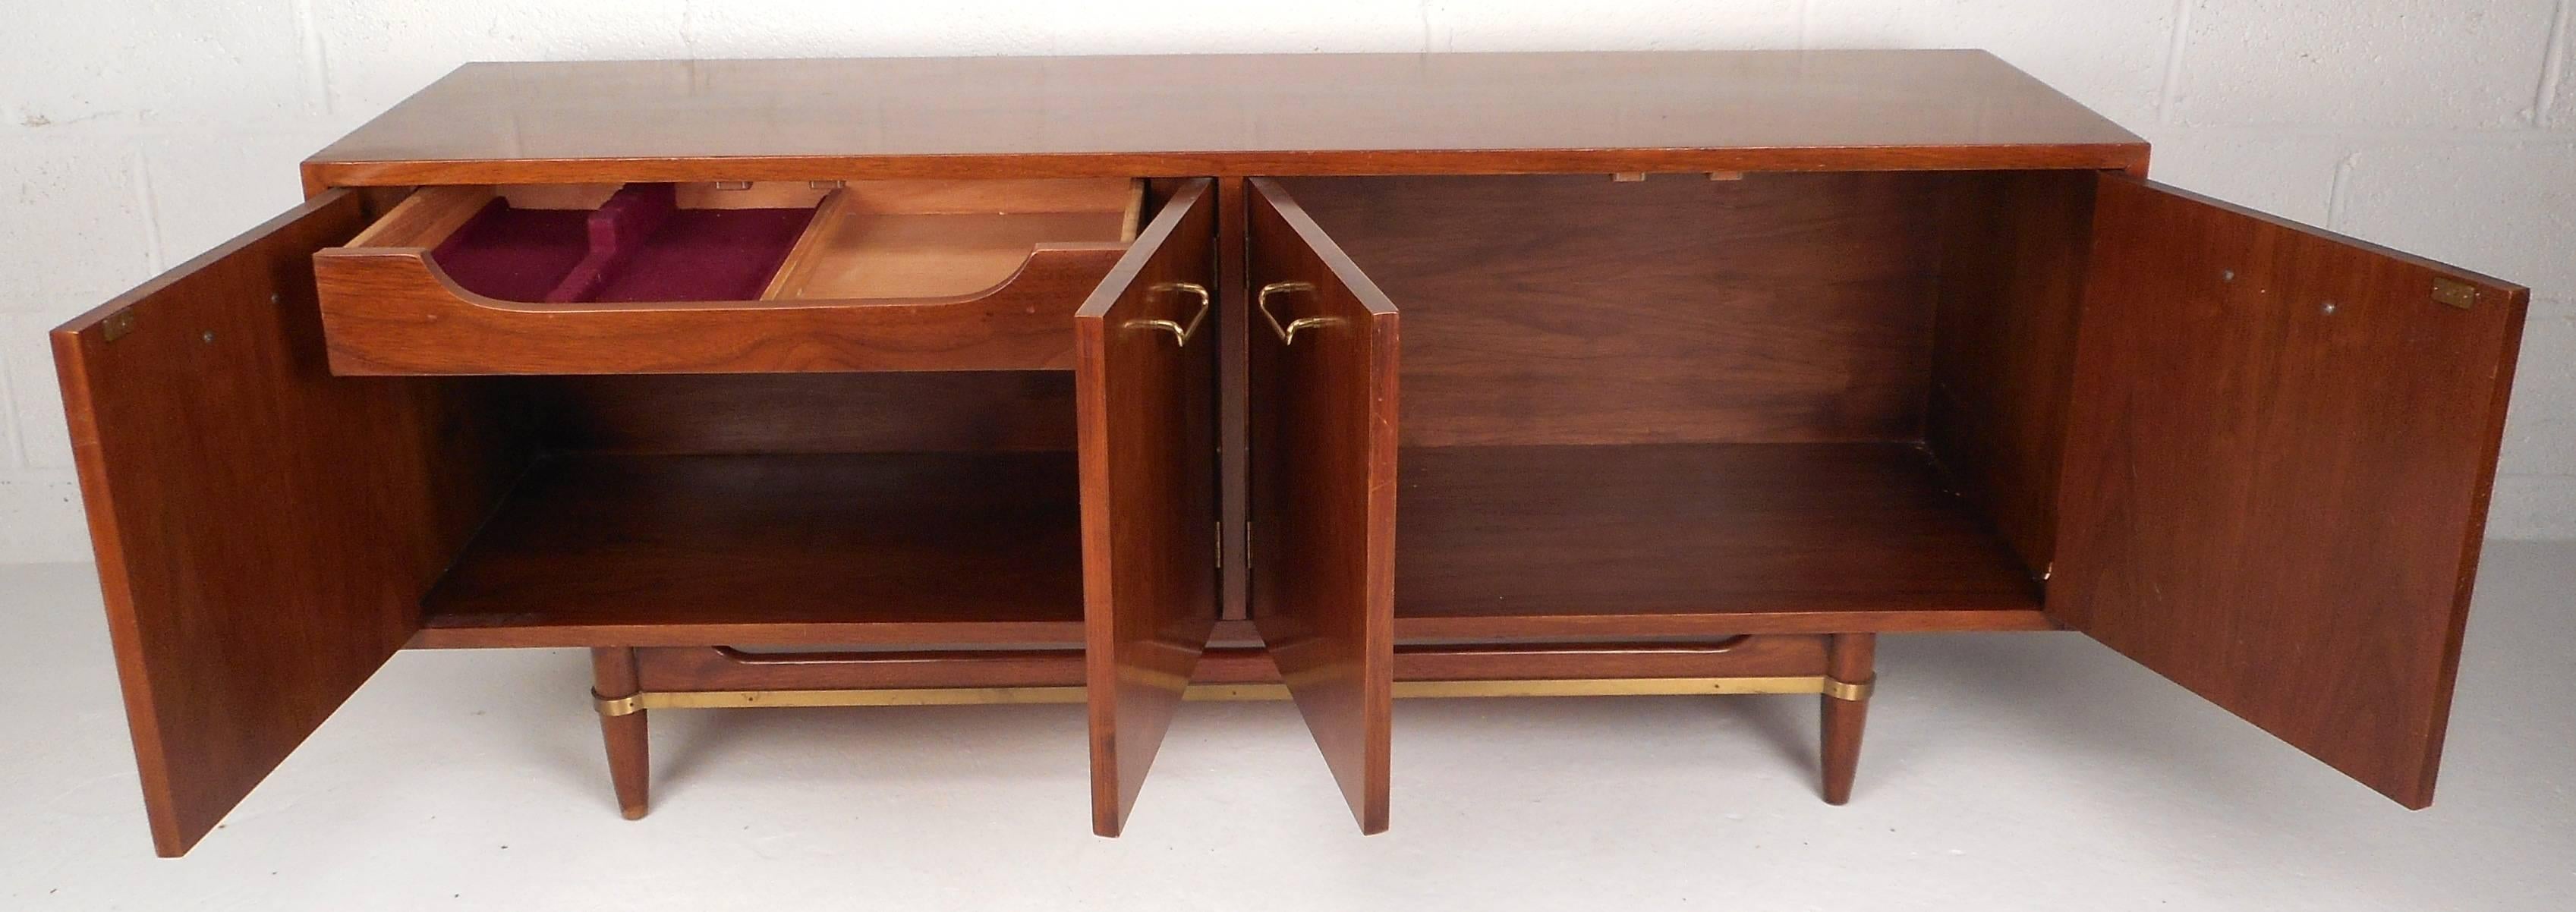 Late 20th Century Mid-Century Modern Small Credenza by American of Martinsville